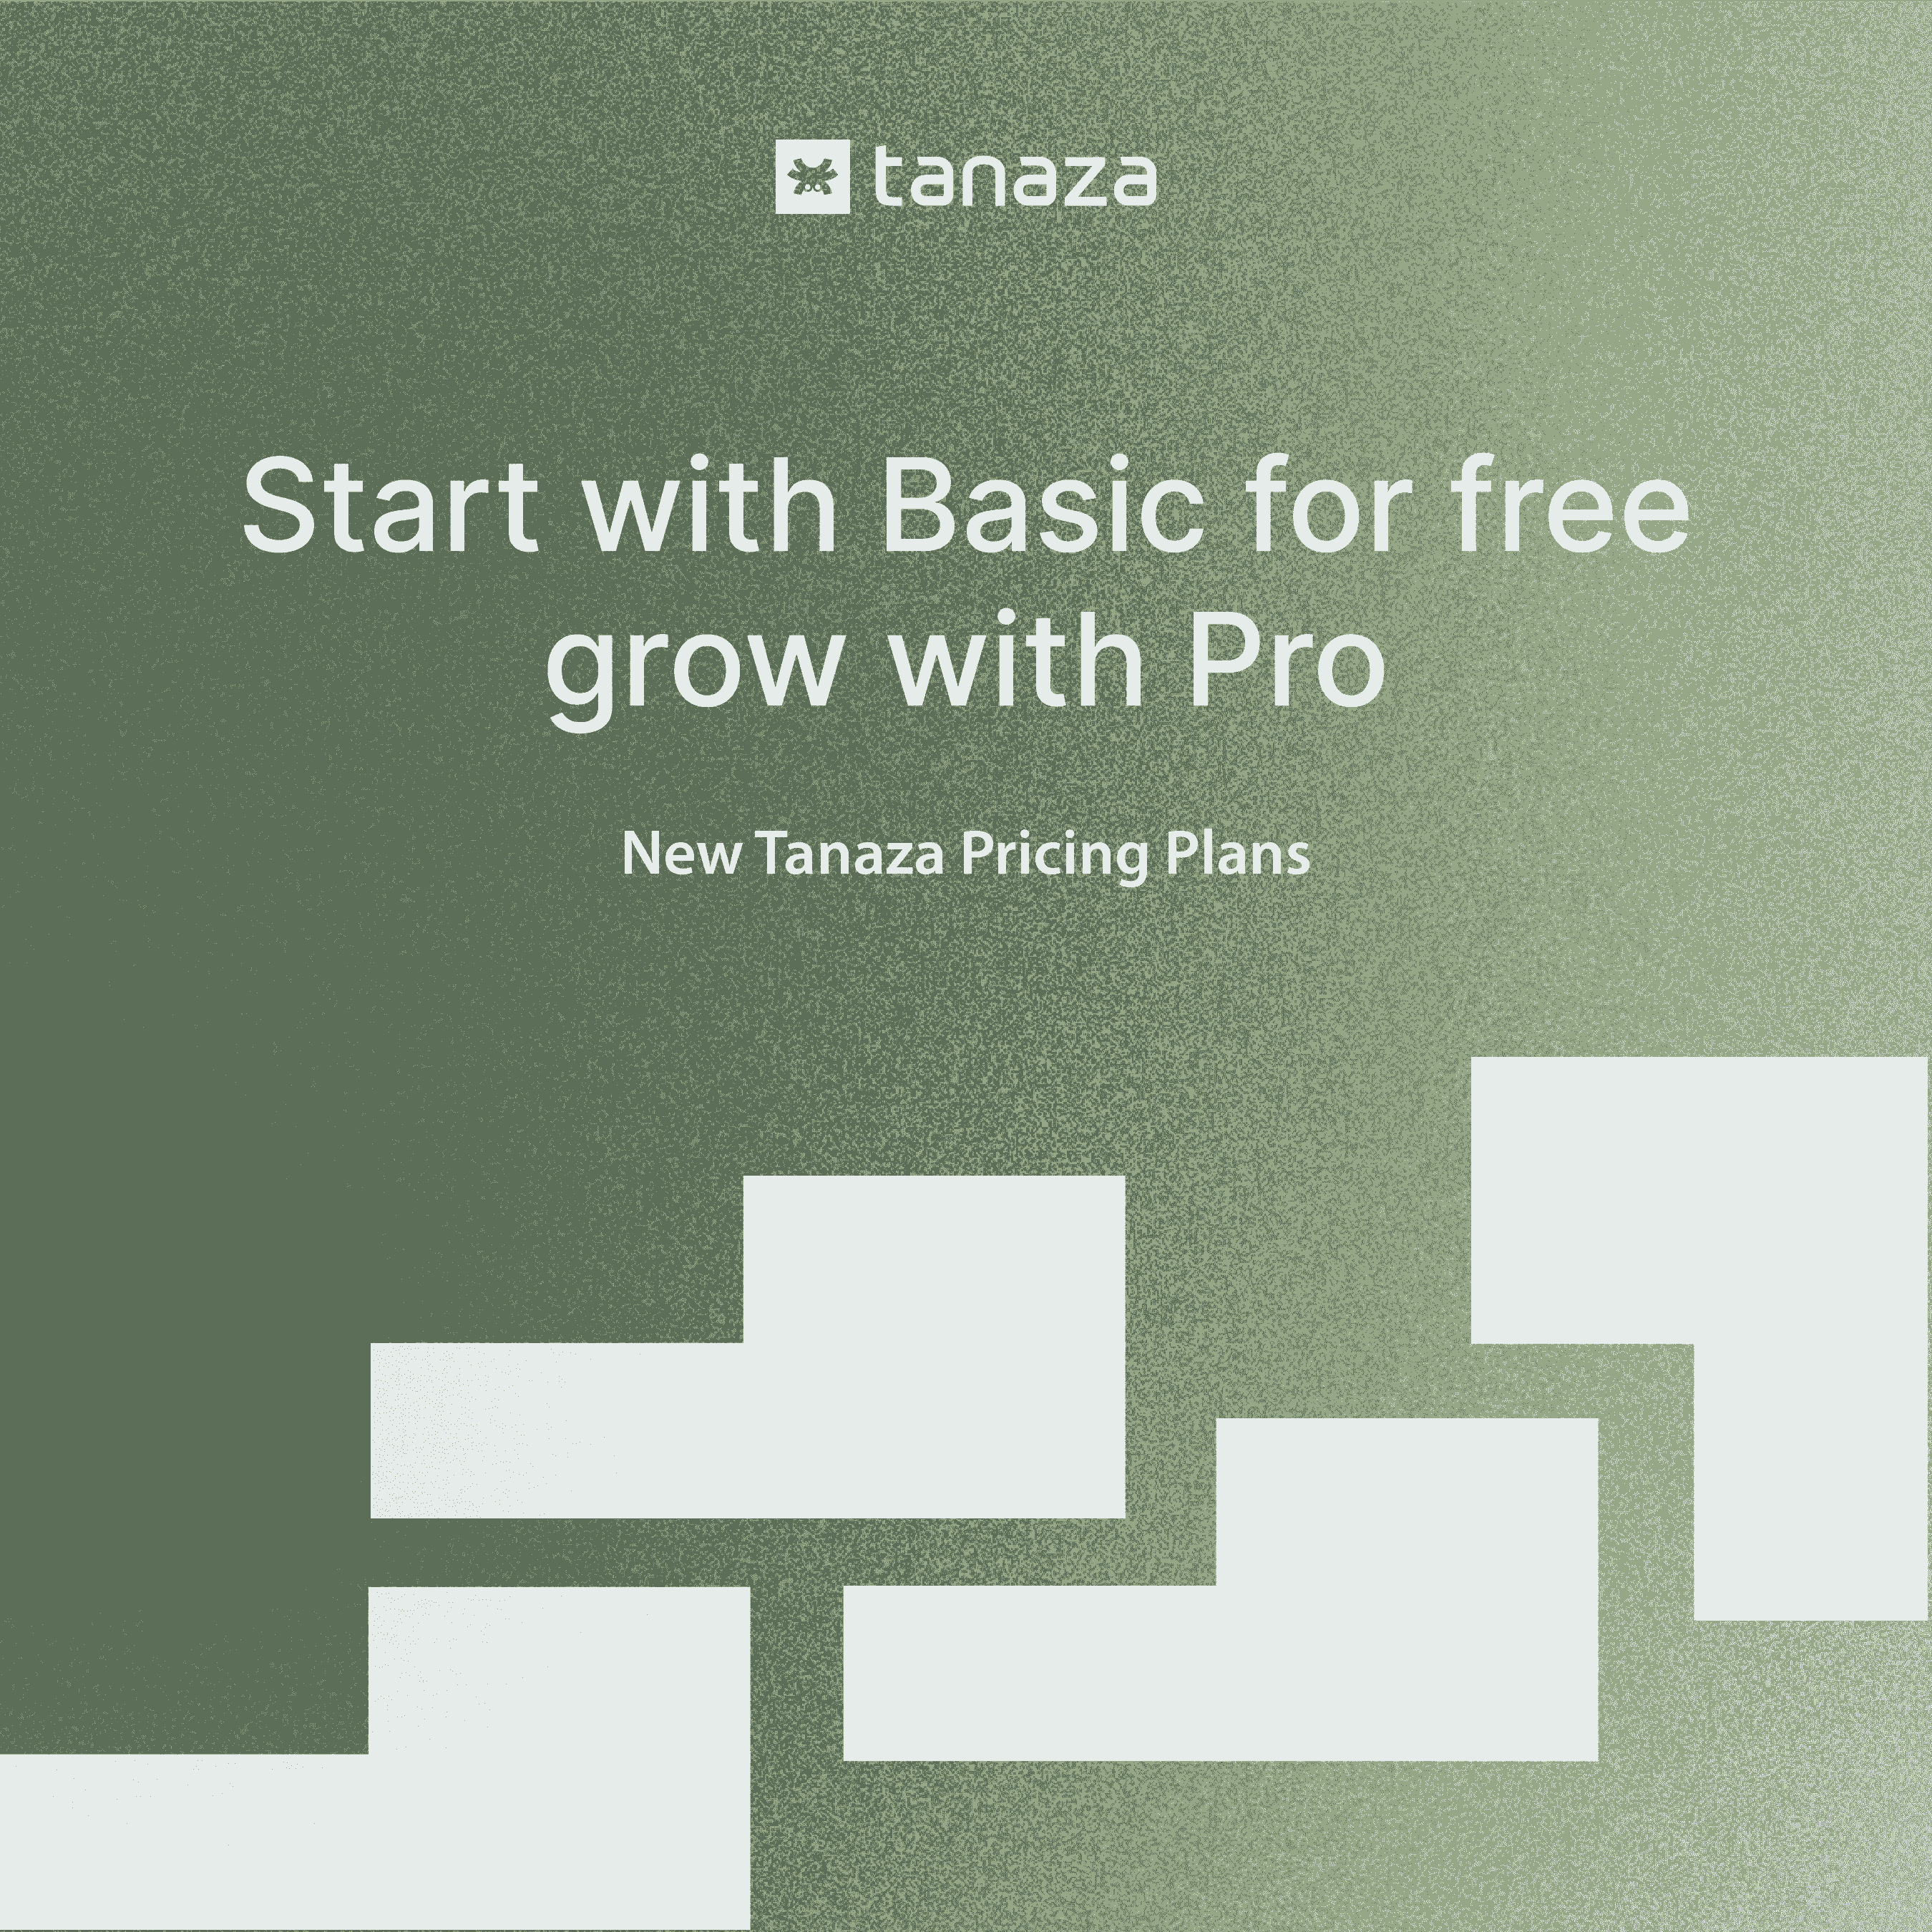 Start with Basic, grow with Pro